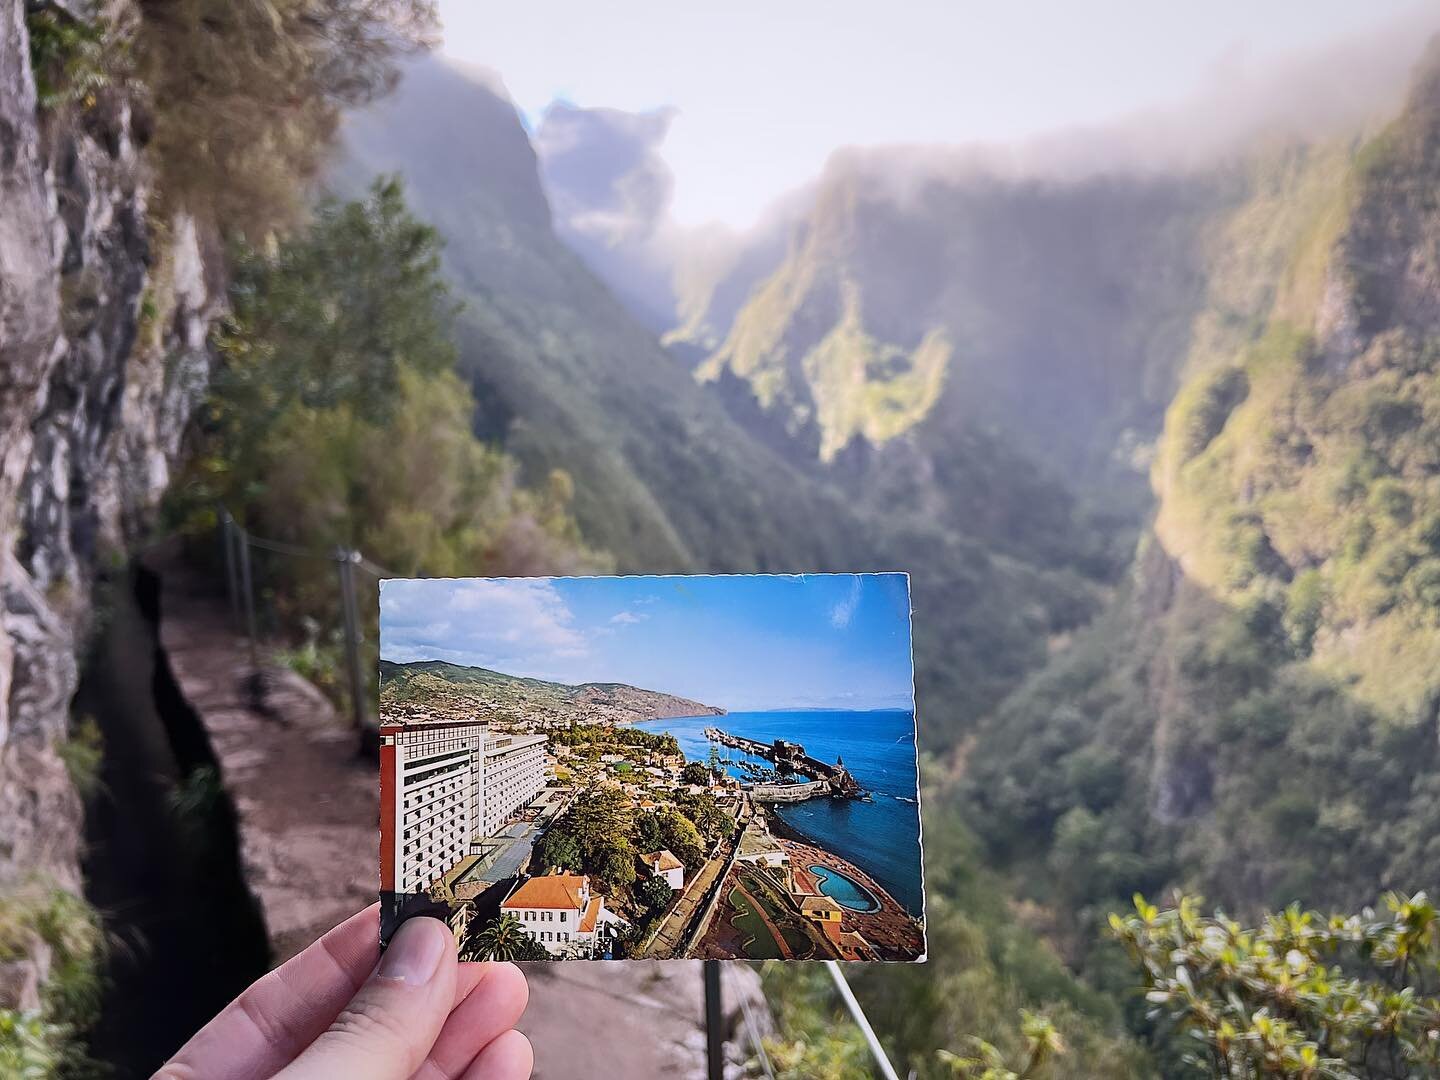 This postcard was my first my glimpse into Madeira. I knew my grandfather&rsquo;s family was from here, but not much else. 

My grandfather had this postcard because he planned a trip to see where his family was from. 

I ended up with this postcard 